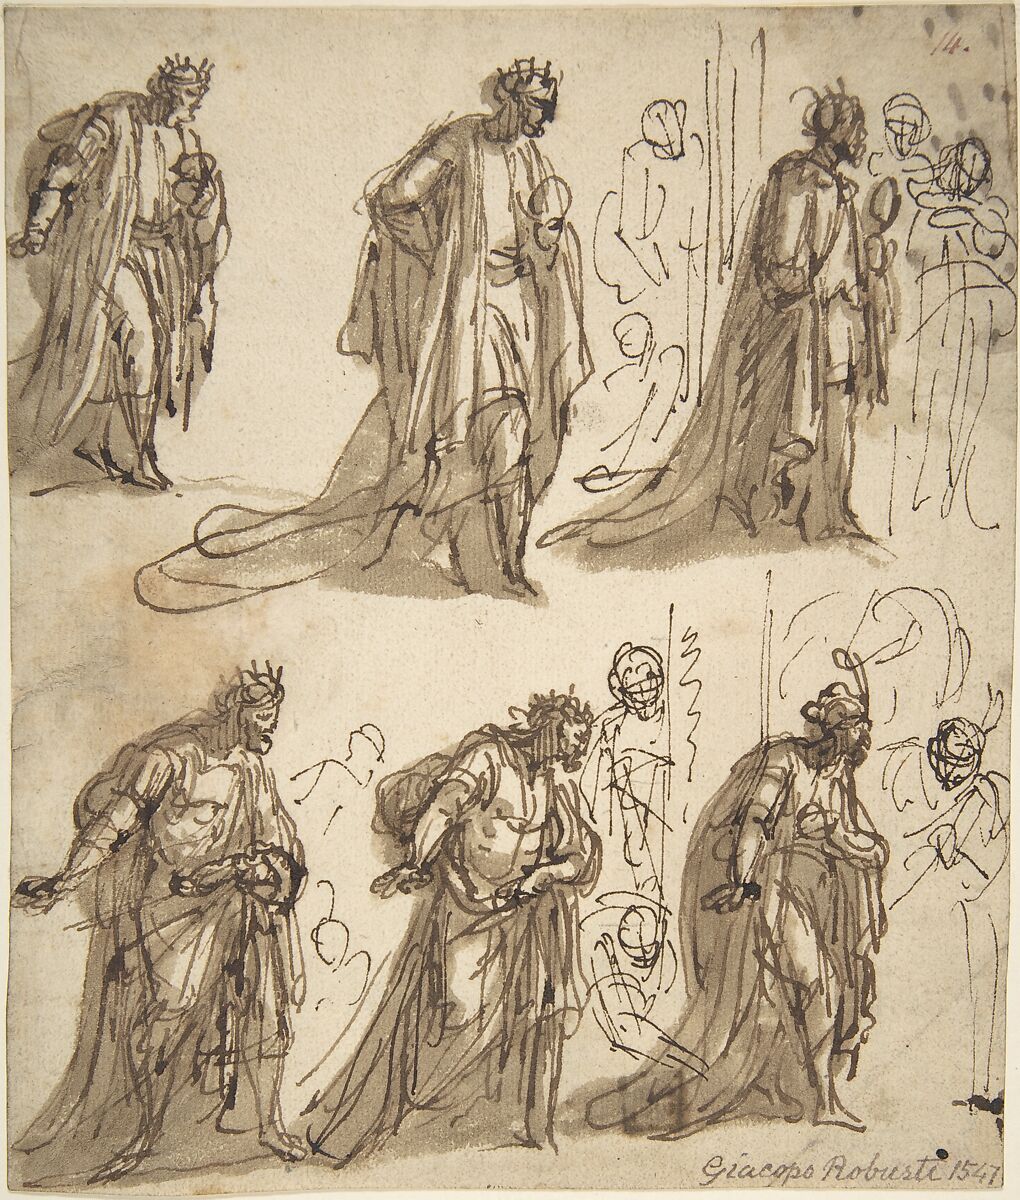 Six Studies of a King for an Adoration, Anonymous, Italian, Venetian, 16th century, Pen and ink, brush and brown wash on cream-colored paper 